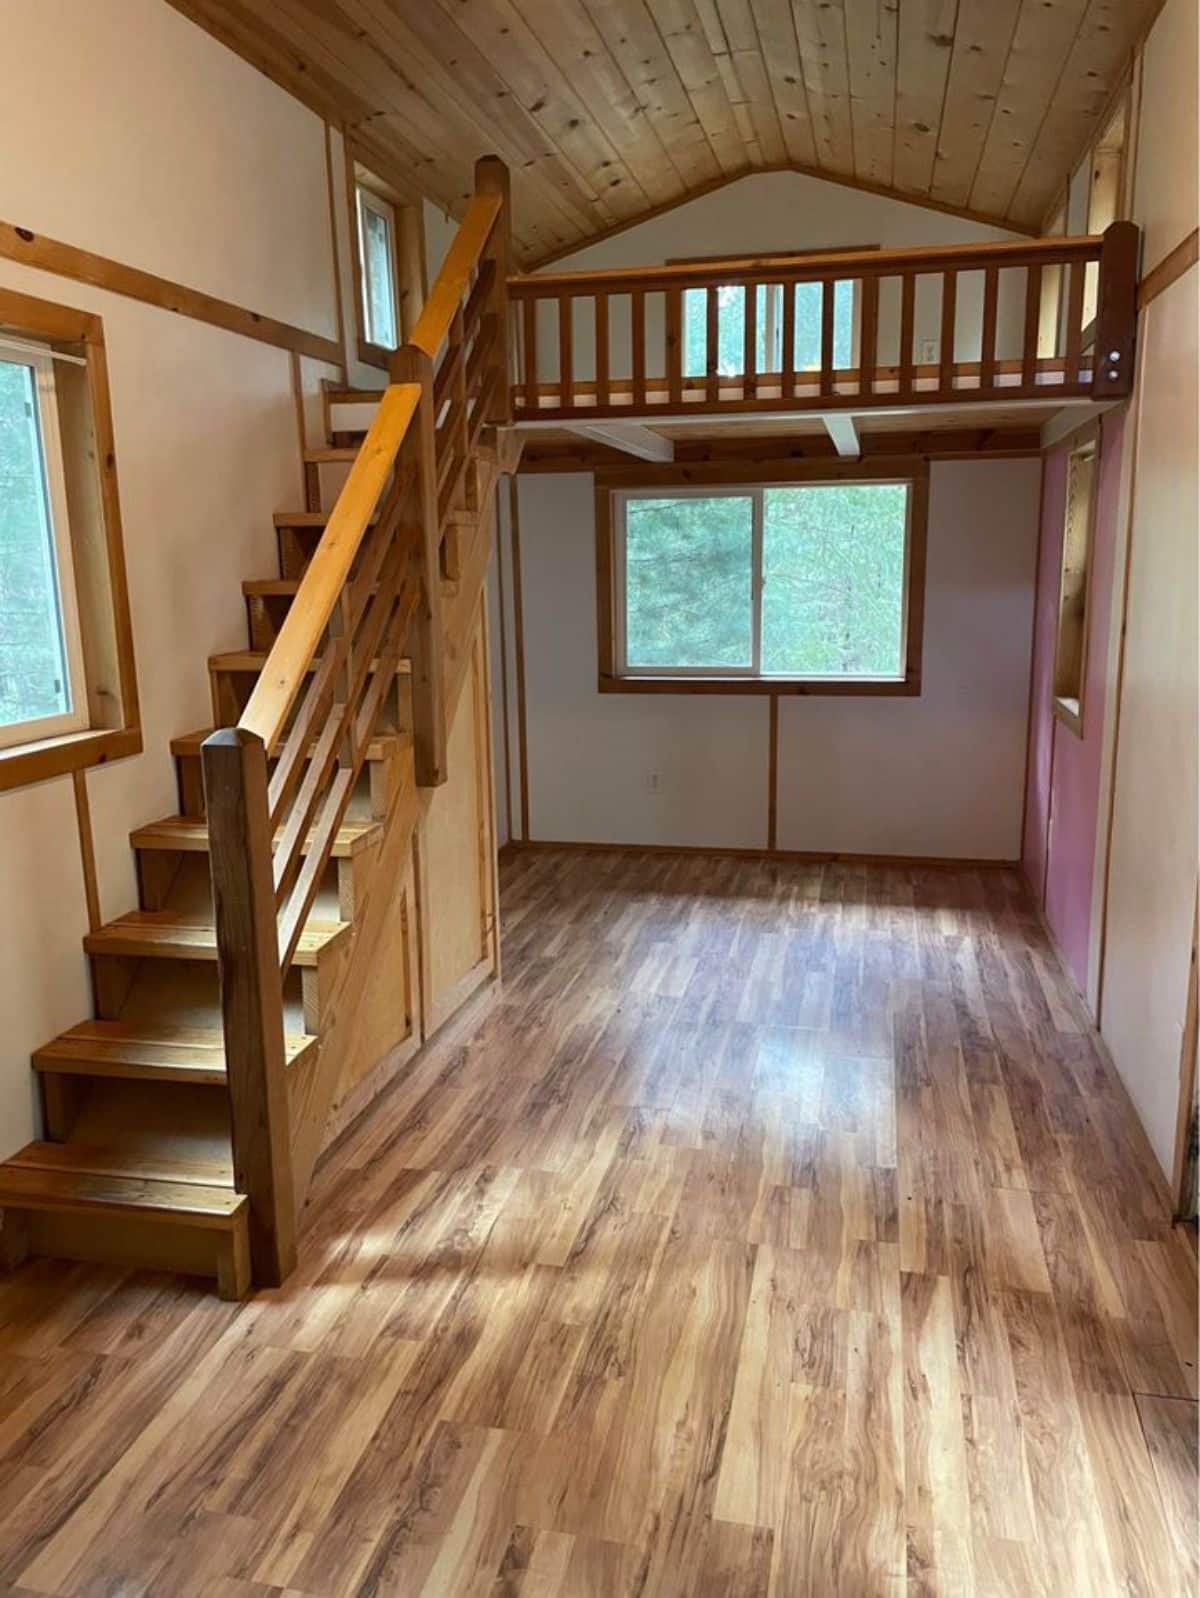 Living area of 27’ Tiny House With Two Lofts is small but brighter because of windows and has a loft above